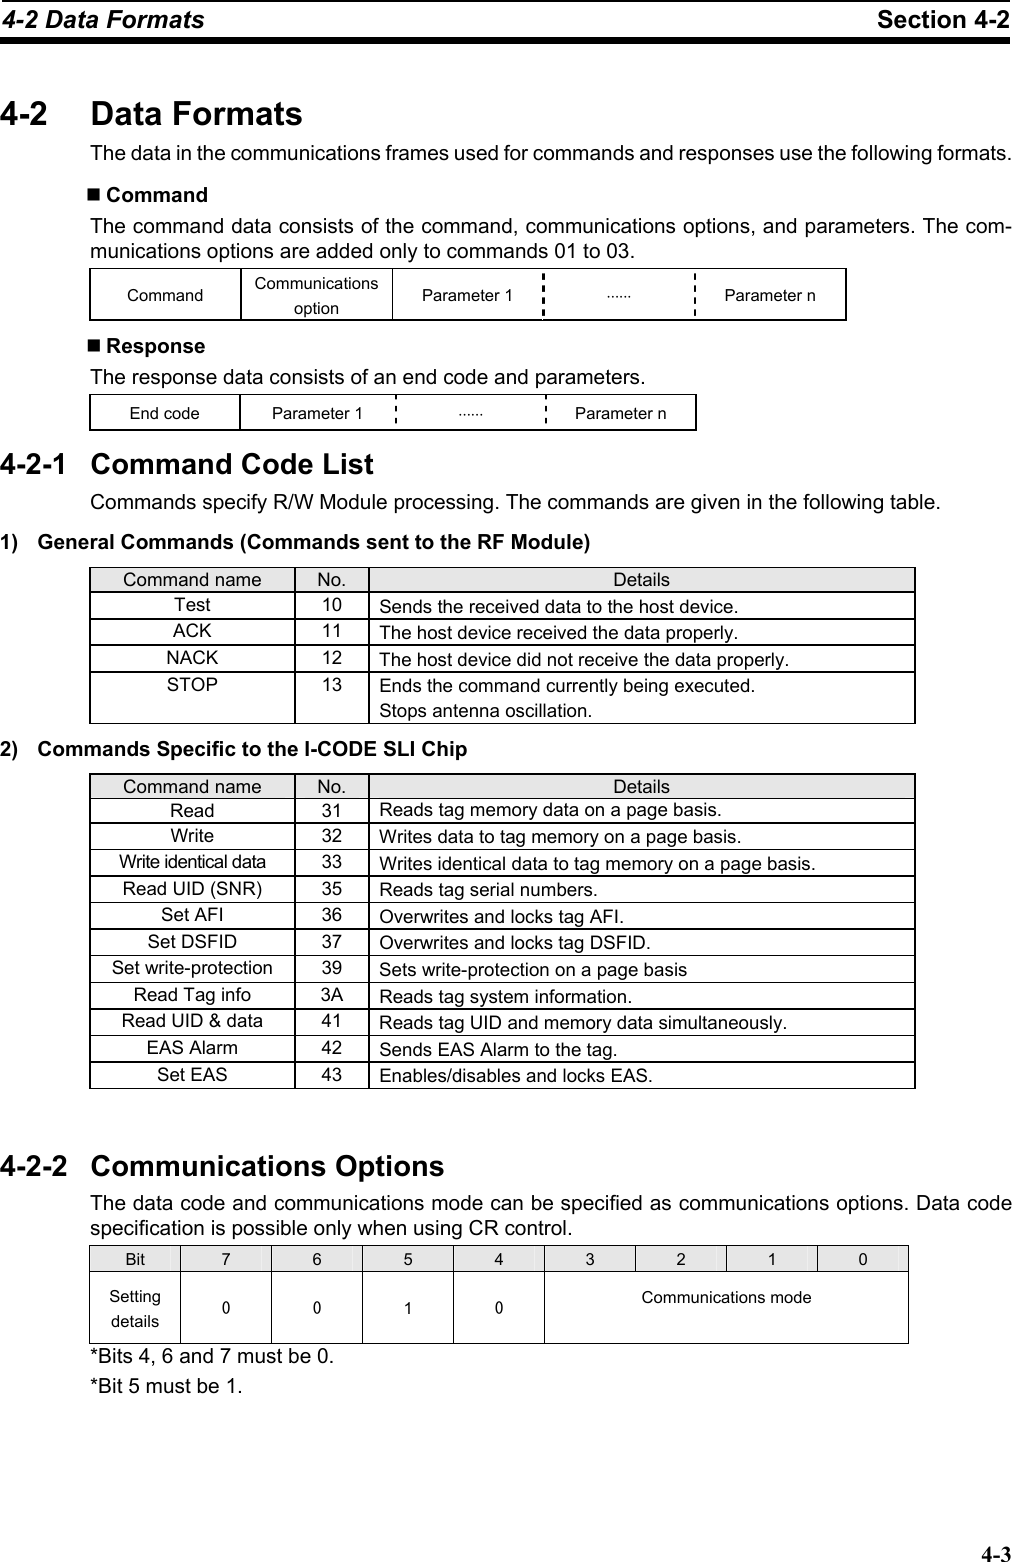  4-2 Data Formats  Section 4-2 4-3 4-2 Data Formats The data in the communications frames used for commands and responses use the following formats.  Command The command data consists of the command, communications options, and parameters. The com-munications options are added only to commands 01 to 03. Command Communications option Parameter 1 ⋅⋅⋅⋅⋅⋅ Parameter n  Response The response data consists of an end code and parameters. End code Parameter 1 ⋅⋅⋅⋅⋅⋅ Parameter n 4-2-1  Command Code List Commands specify R/W Module processing. The commands are given in the following table. 1)  General Commands (Commands sent to the RF Module) Command name No. Details Test 10  Sends the received data to the host device. ACK 11  The host device received the data properly. NACK 12  The host device did not receive the data properly. STOP 13  Ends the command currently being executed.  Stops antenna oscillation. 2)  Commands Specific to the I-CODE SLI Chip Command name No. Details Read 31  Reads tag memory data on a page basis. Write 32  Writes data to tag memory on a page basis. Write identical data 33  Writes identical data to tag memory on a page basis. Read UID (SNR) 35  Reads tag serial numbers. Set AFI 36  Overwrites and locks tag AFI. Set DSFID 37  Overwrites and locks tag DSFID. Set write-protection 39  Sets write-protection on a page basis Read Tag info 3A  Reads tag system information. Read UID &amp; data 41  Reads tag UID and memory data simultaneously. EAS Alarm 42  Sends EAS Alarm to the tag. Set EAS 43  Enables/disables and locks EAS.   4-2-2 Communications Options The data code and communications mode can be specified as communications options. Data code specification is possible only when using CR control. Bit 7  6  5  4  3  2  1  0 Setting details 0  0  1 0  Communications mode  *Bits 4, 6 and 7 must be 0. *Bit 5 must be 1.  